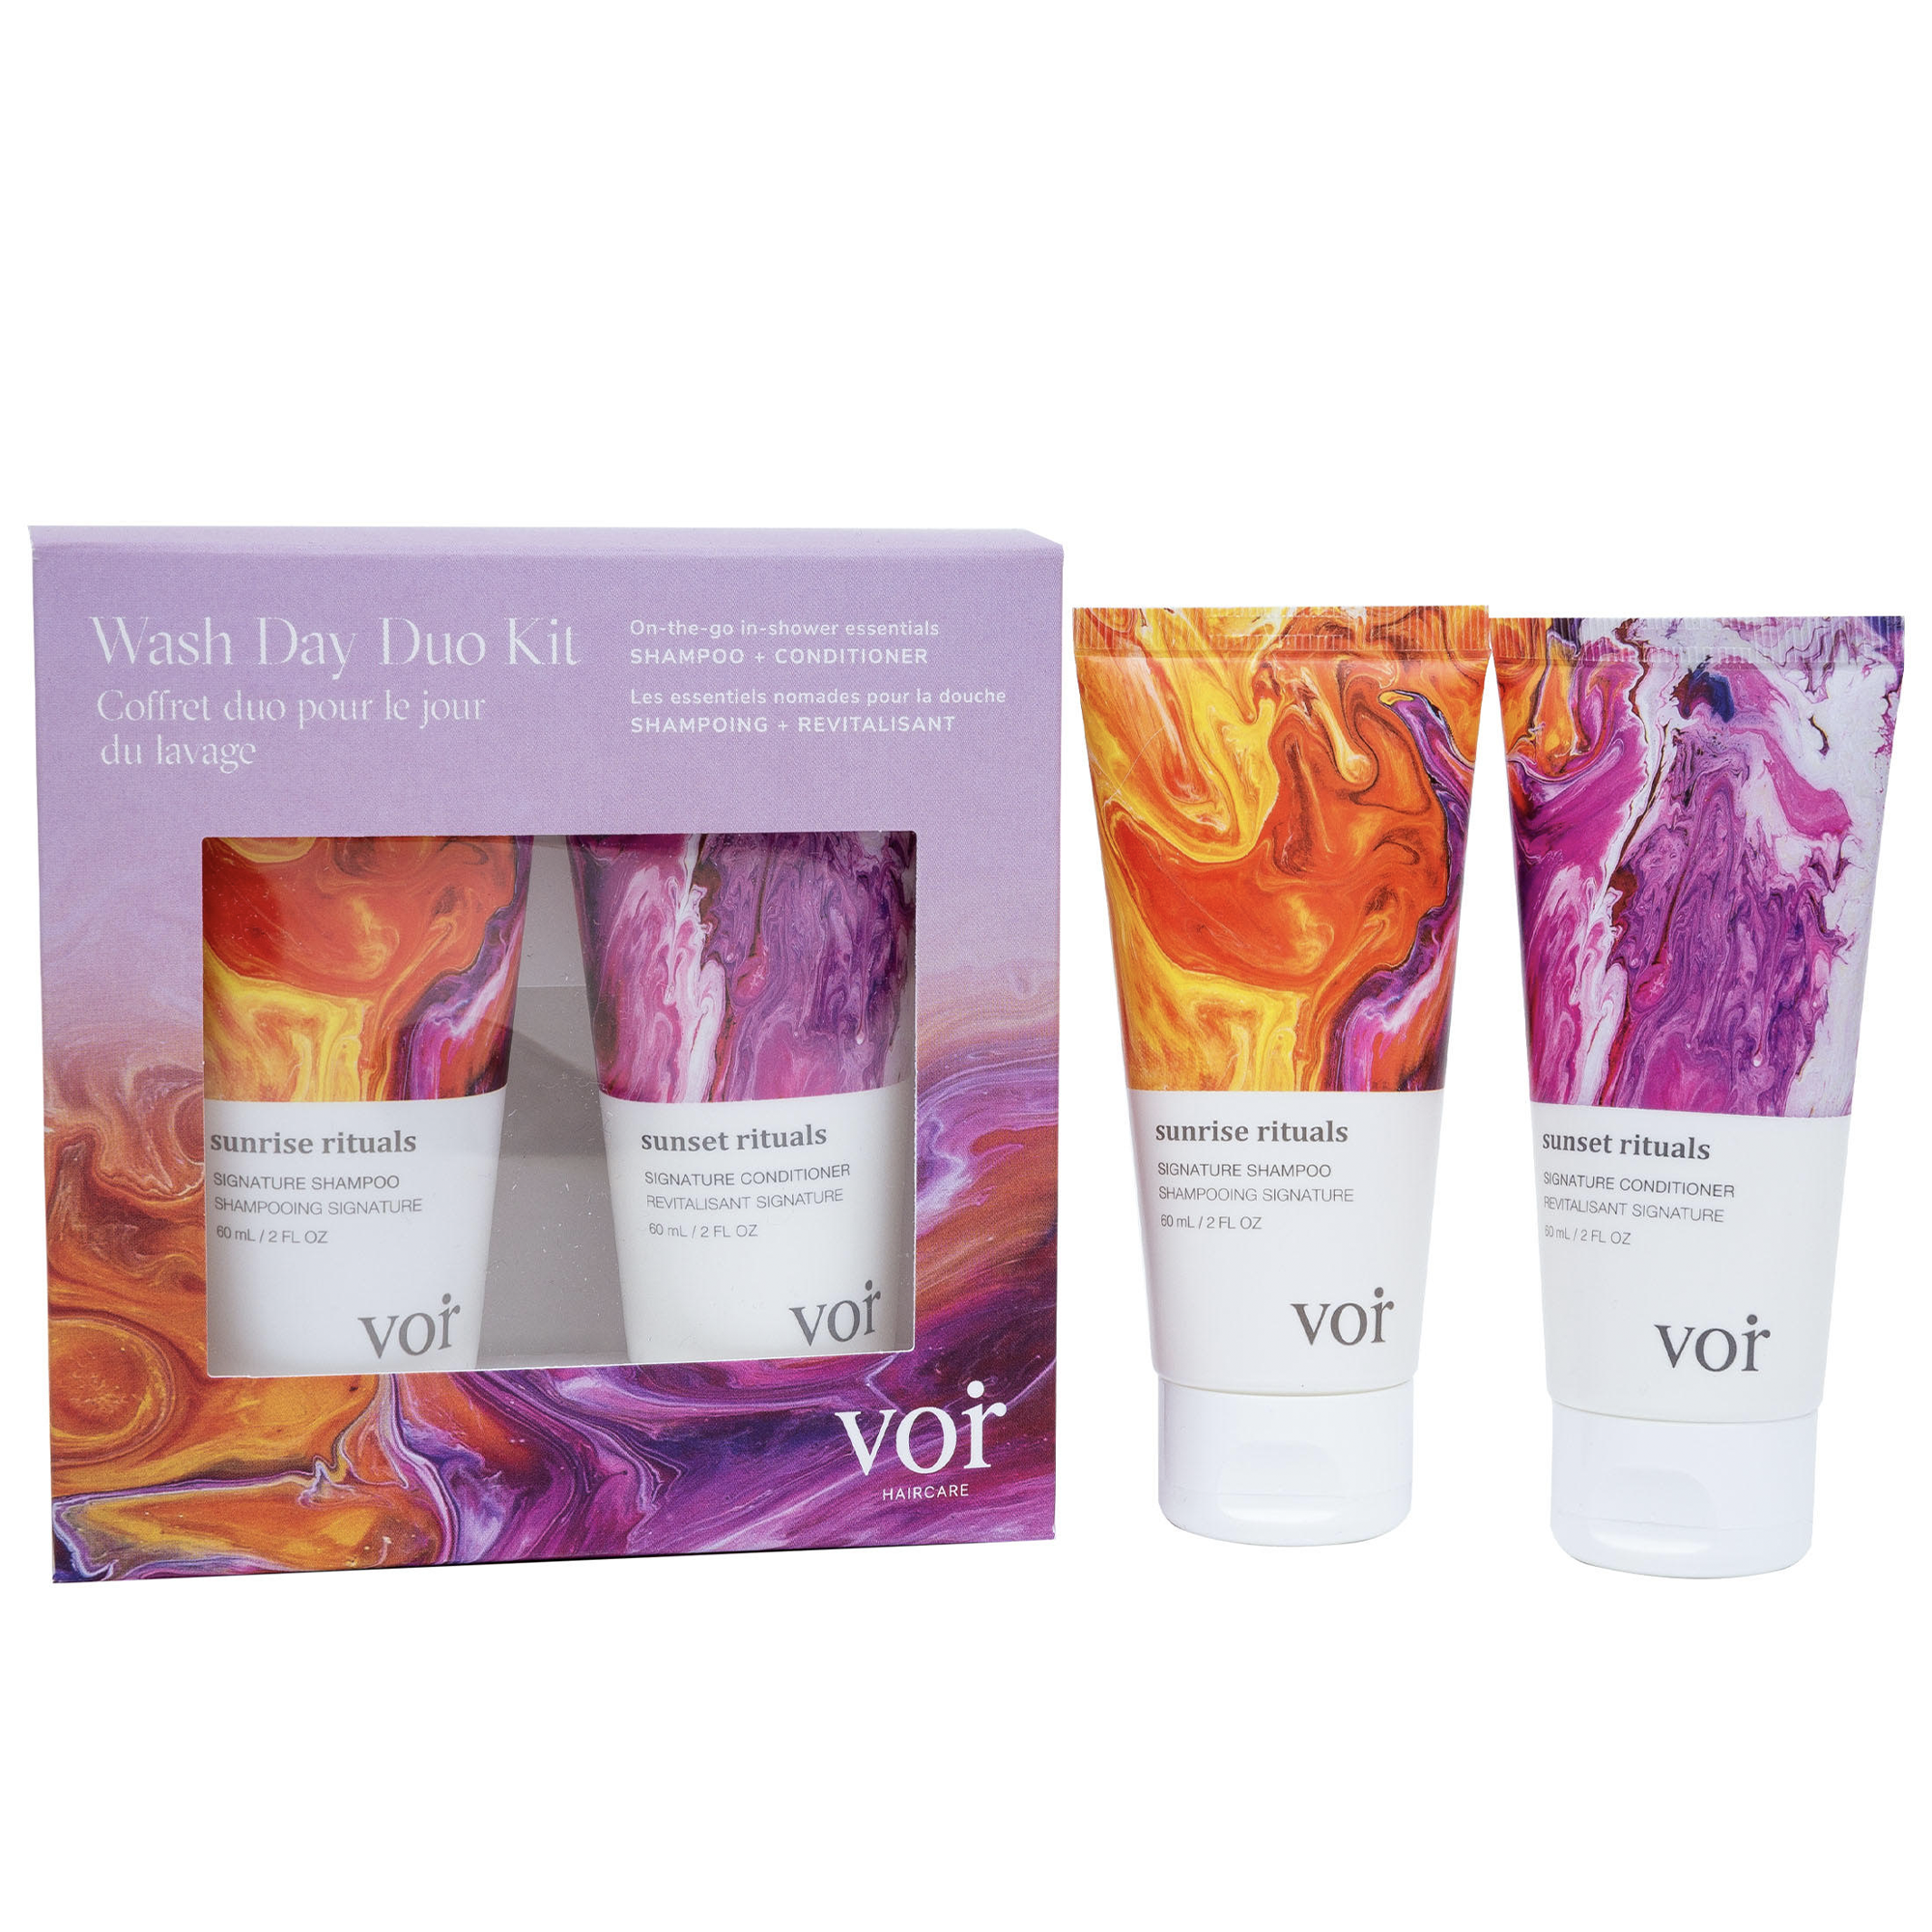 Wash Day Duo Kit by VOIR Haircare available online in Canada at Socialite Beauty.